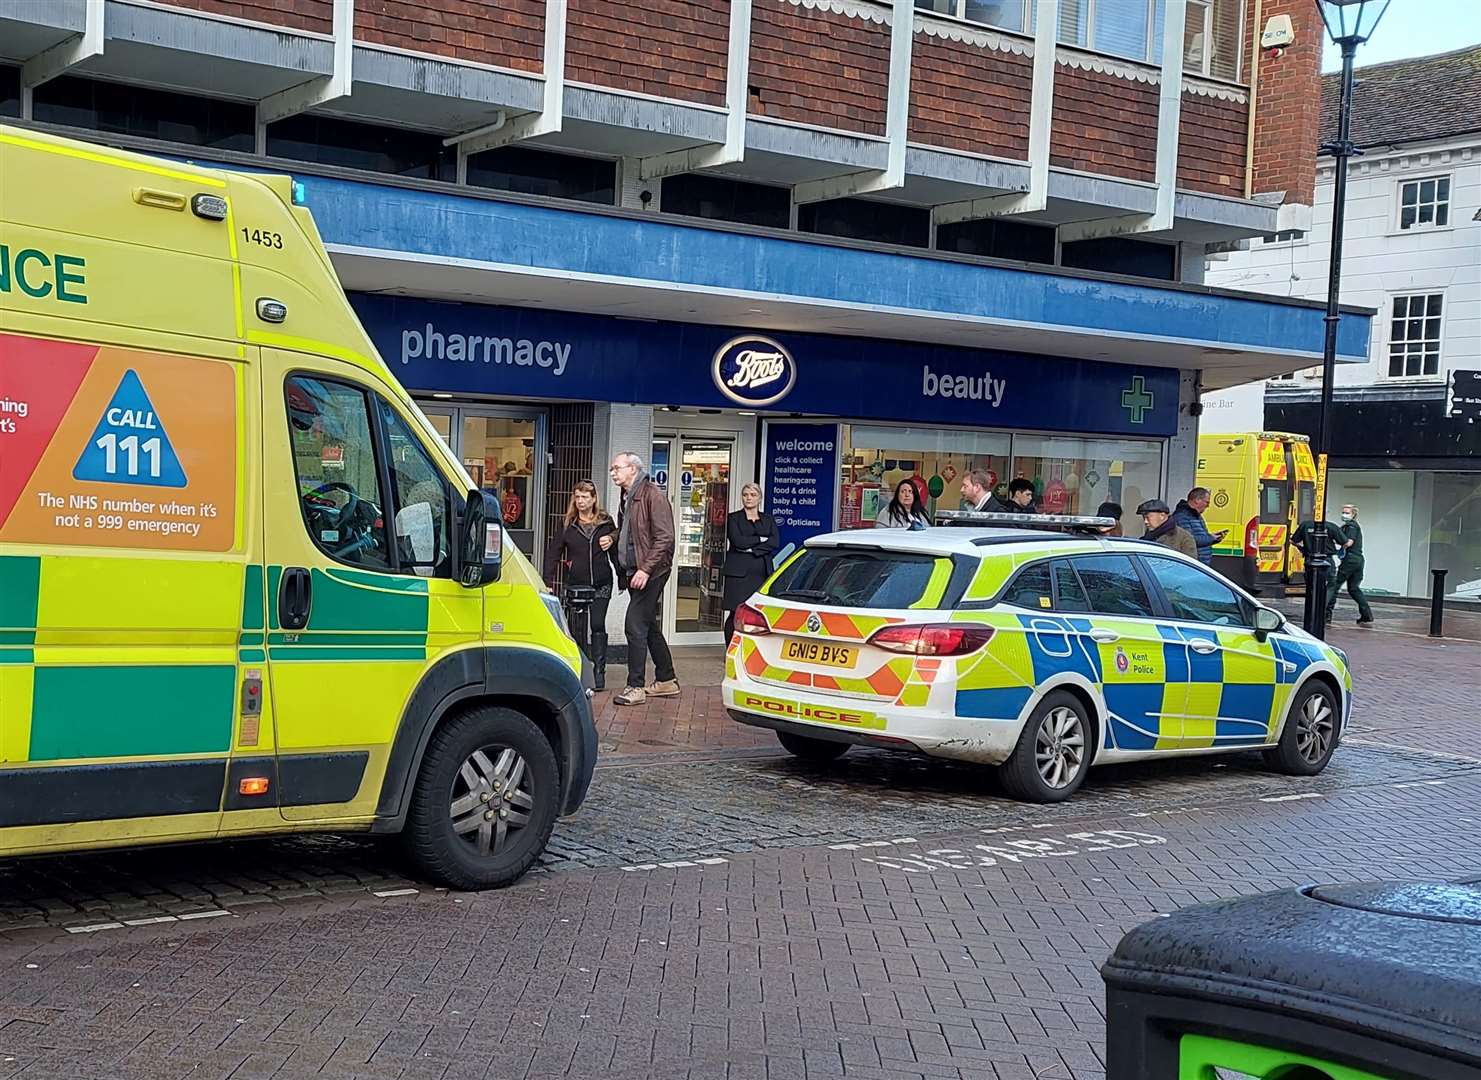 Boots is closed while the emergency services respond